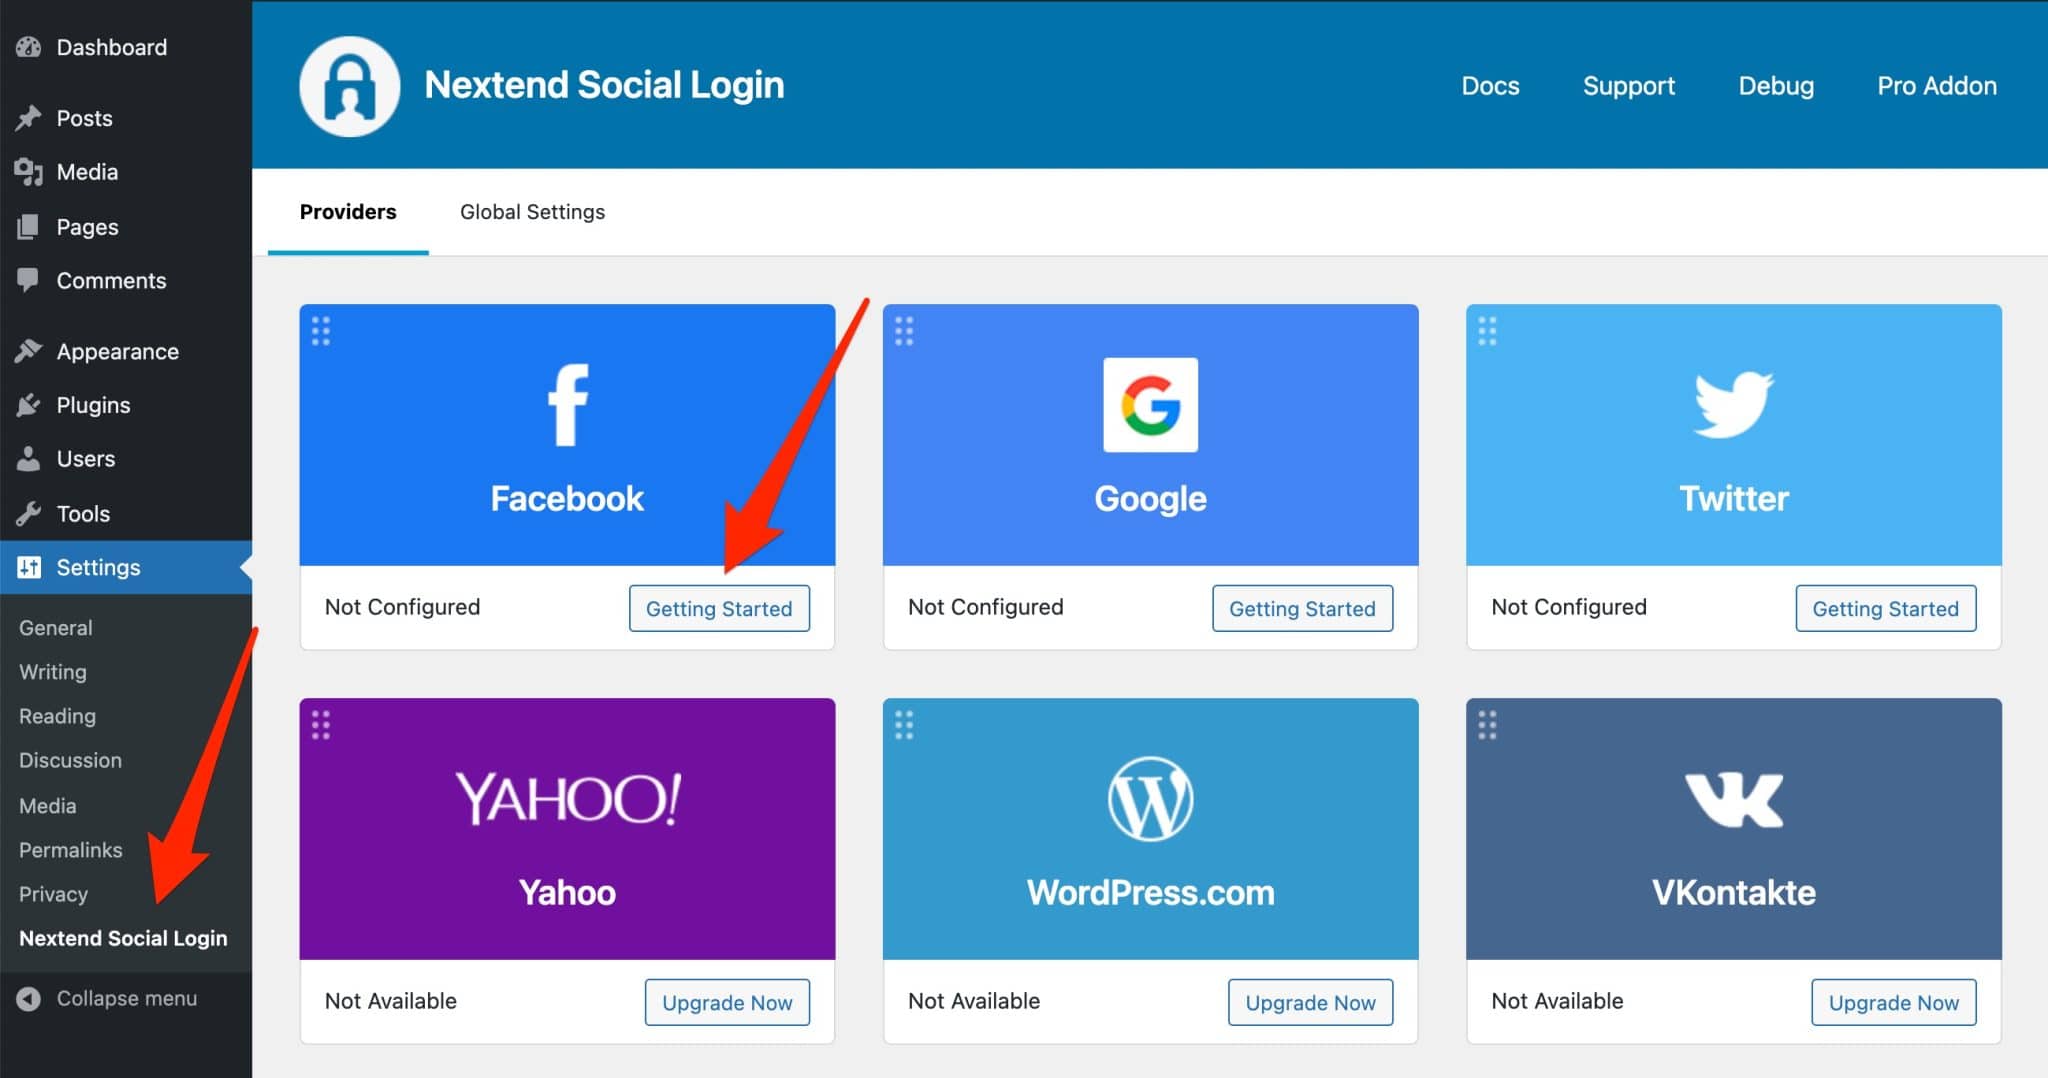 Facebook getting started button in the settings of Nextend Social Login on WordPress.